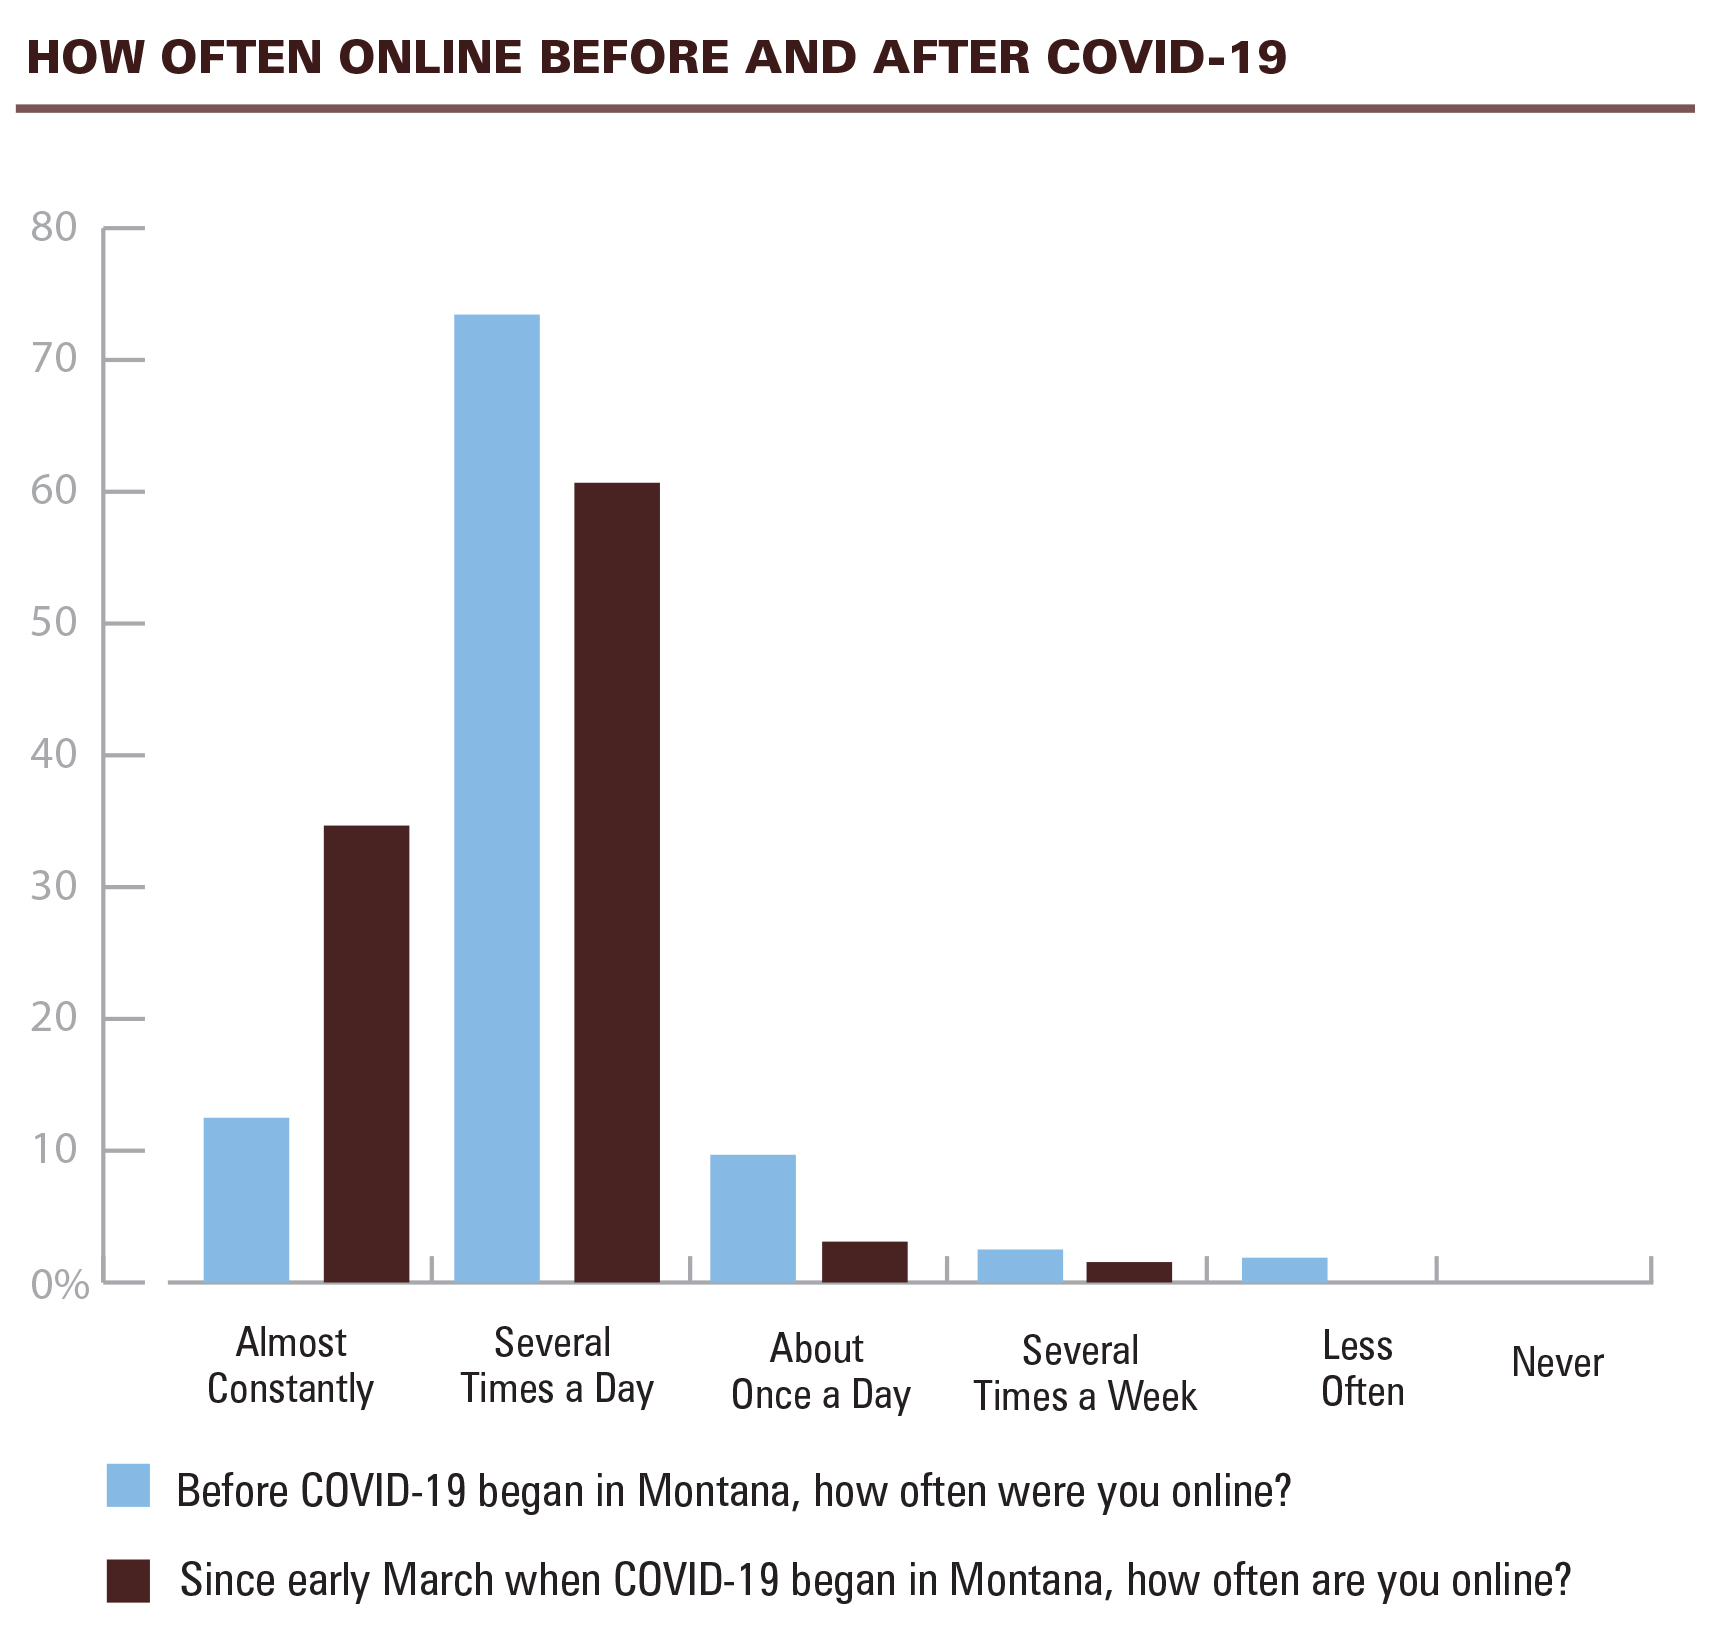 Vertical bar graph visualizing Online use before and after COVID-19: A majority of participants were online several times a day before (72.9%) and after (61.0%) the onset of COVID-19. A large increase in online use was seen after the onset of COVID-19. In particular, 17.1% of respondents identified as being online less often before COVID-19 and 0.0% of respondents identified as being online less often after the onset of COVID-19. Additionally, 12.6% of respondents identified as being online almost constantly before COVID-19 and 33.9% of respondents identified as being online almost constantly after the onset of COVID-19. 